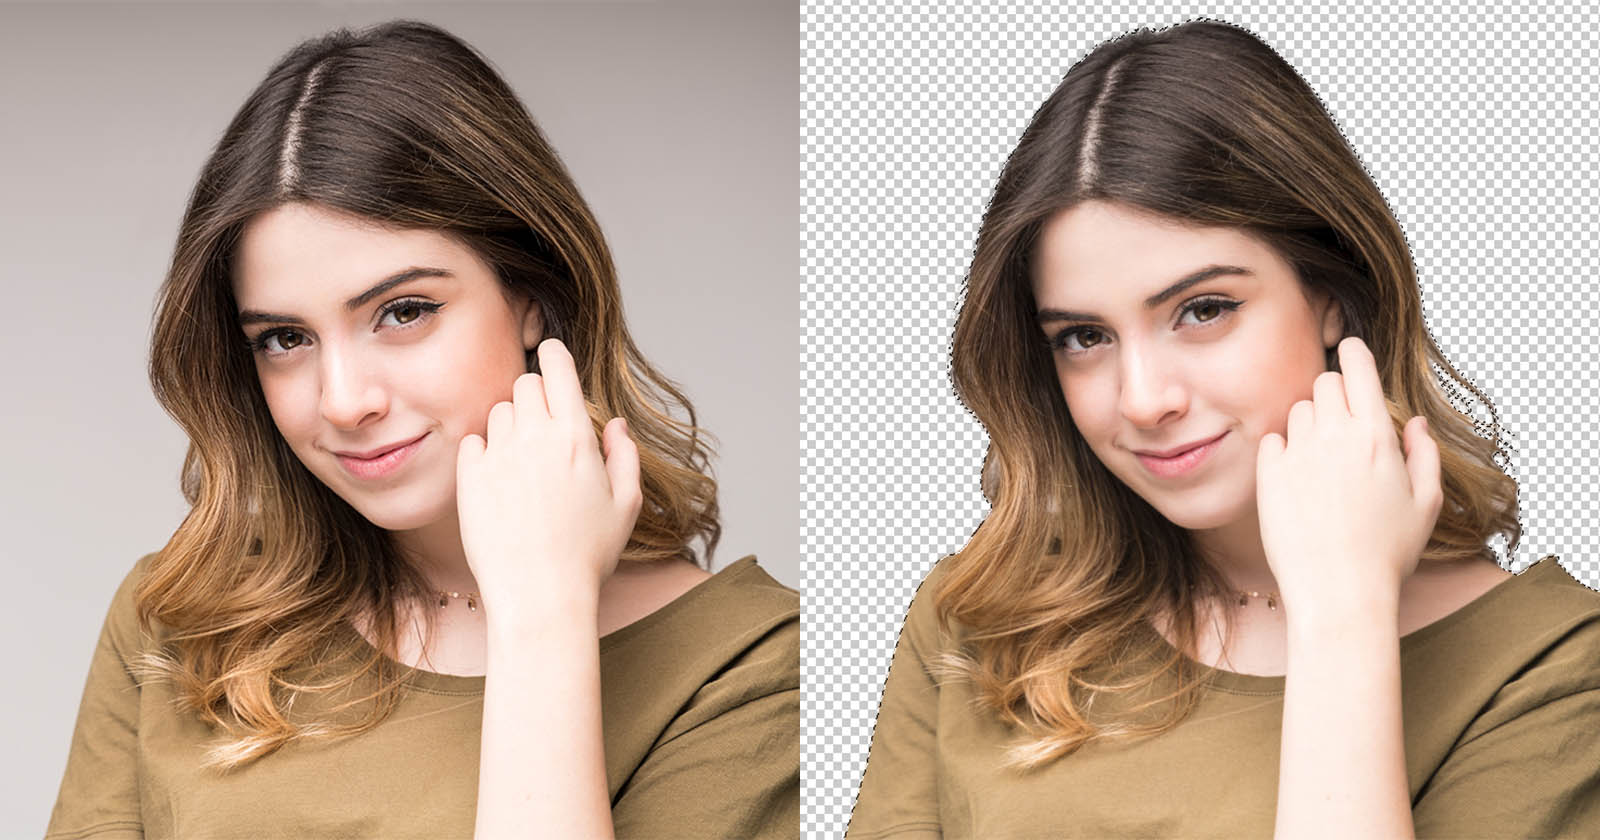 How to Remove a Background in Photoshop   PetaPixel